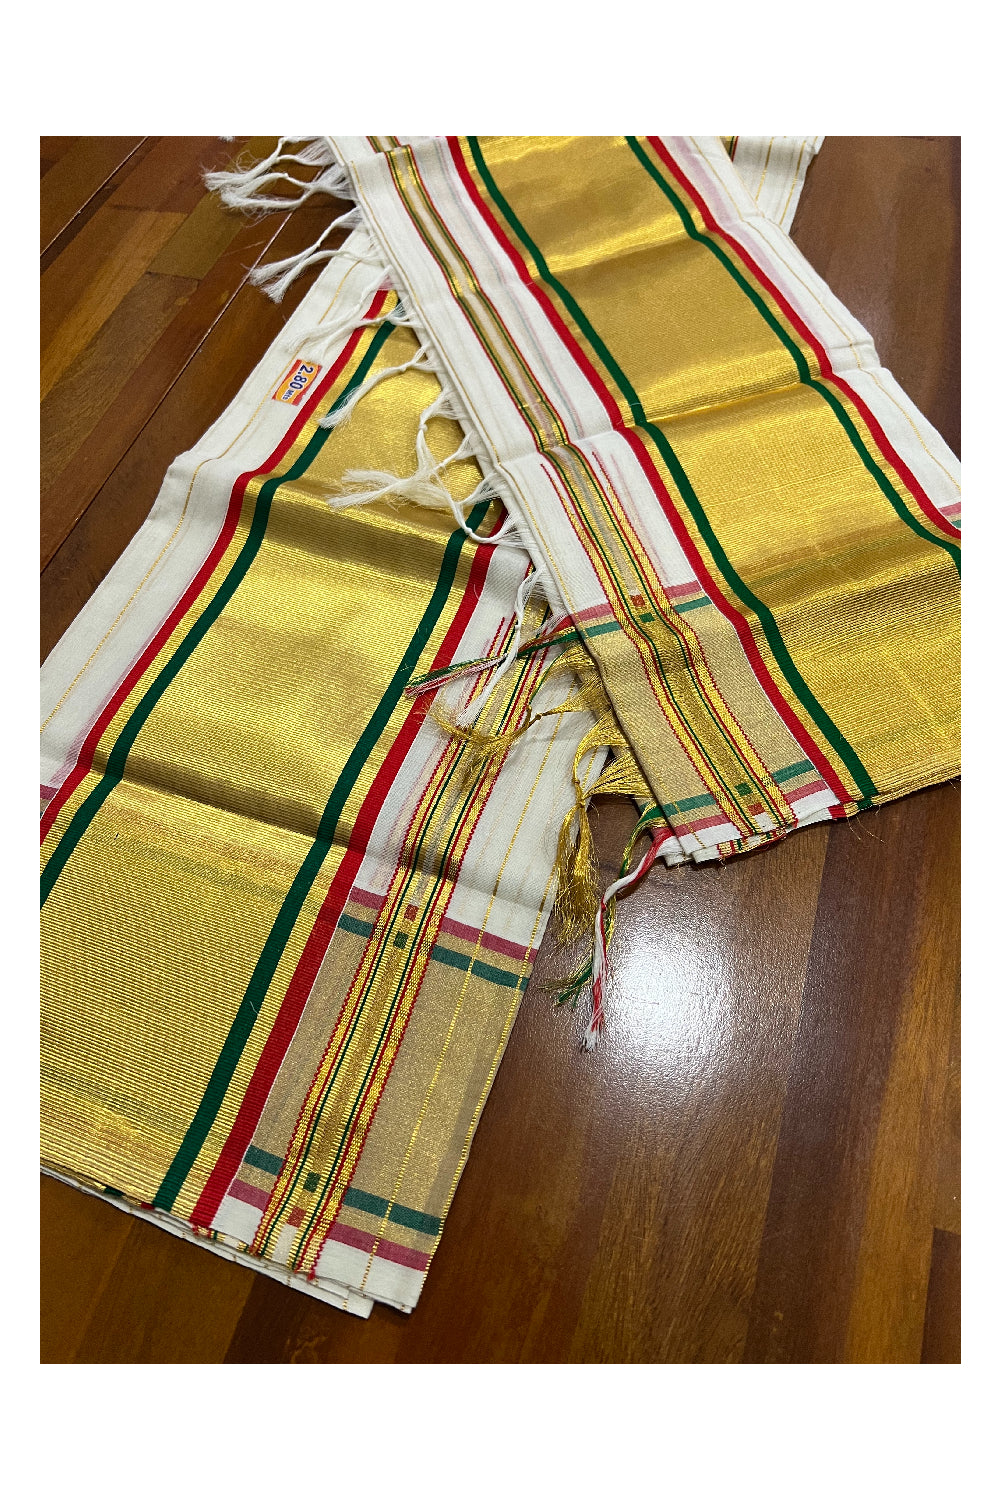 Southloom Handloom Premium Set Mundu with Woven Lines Body with Red and Green Border 2.80 Mtrs